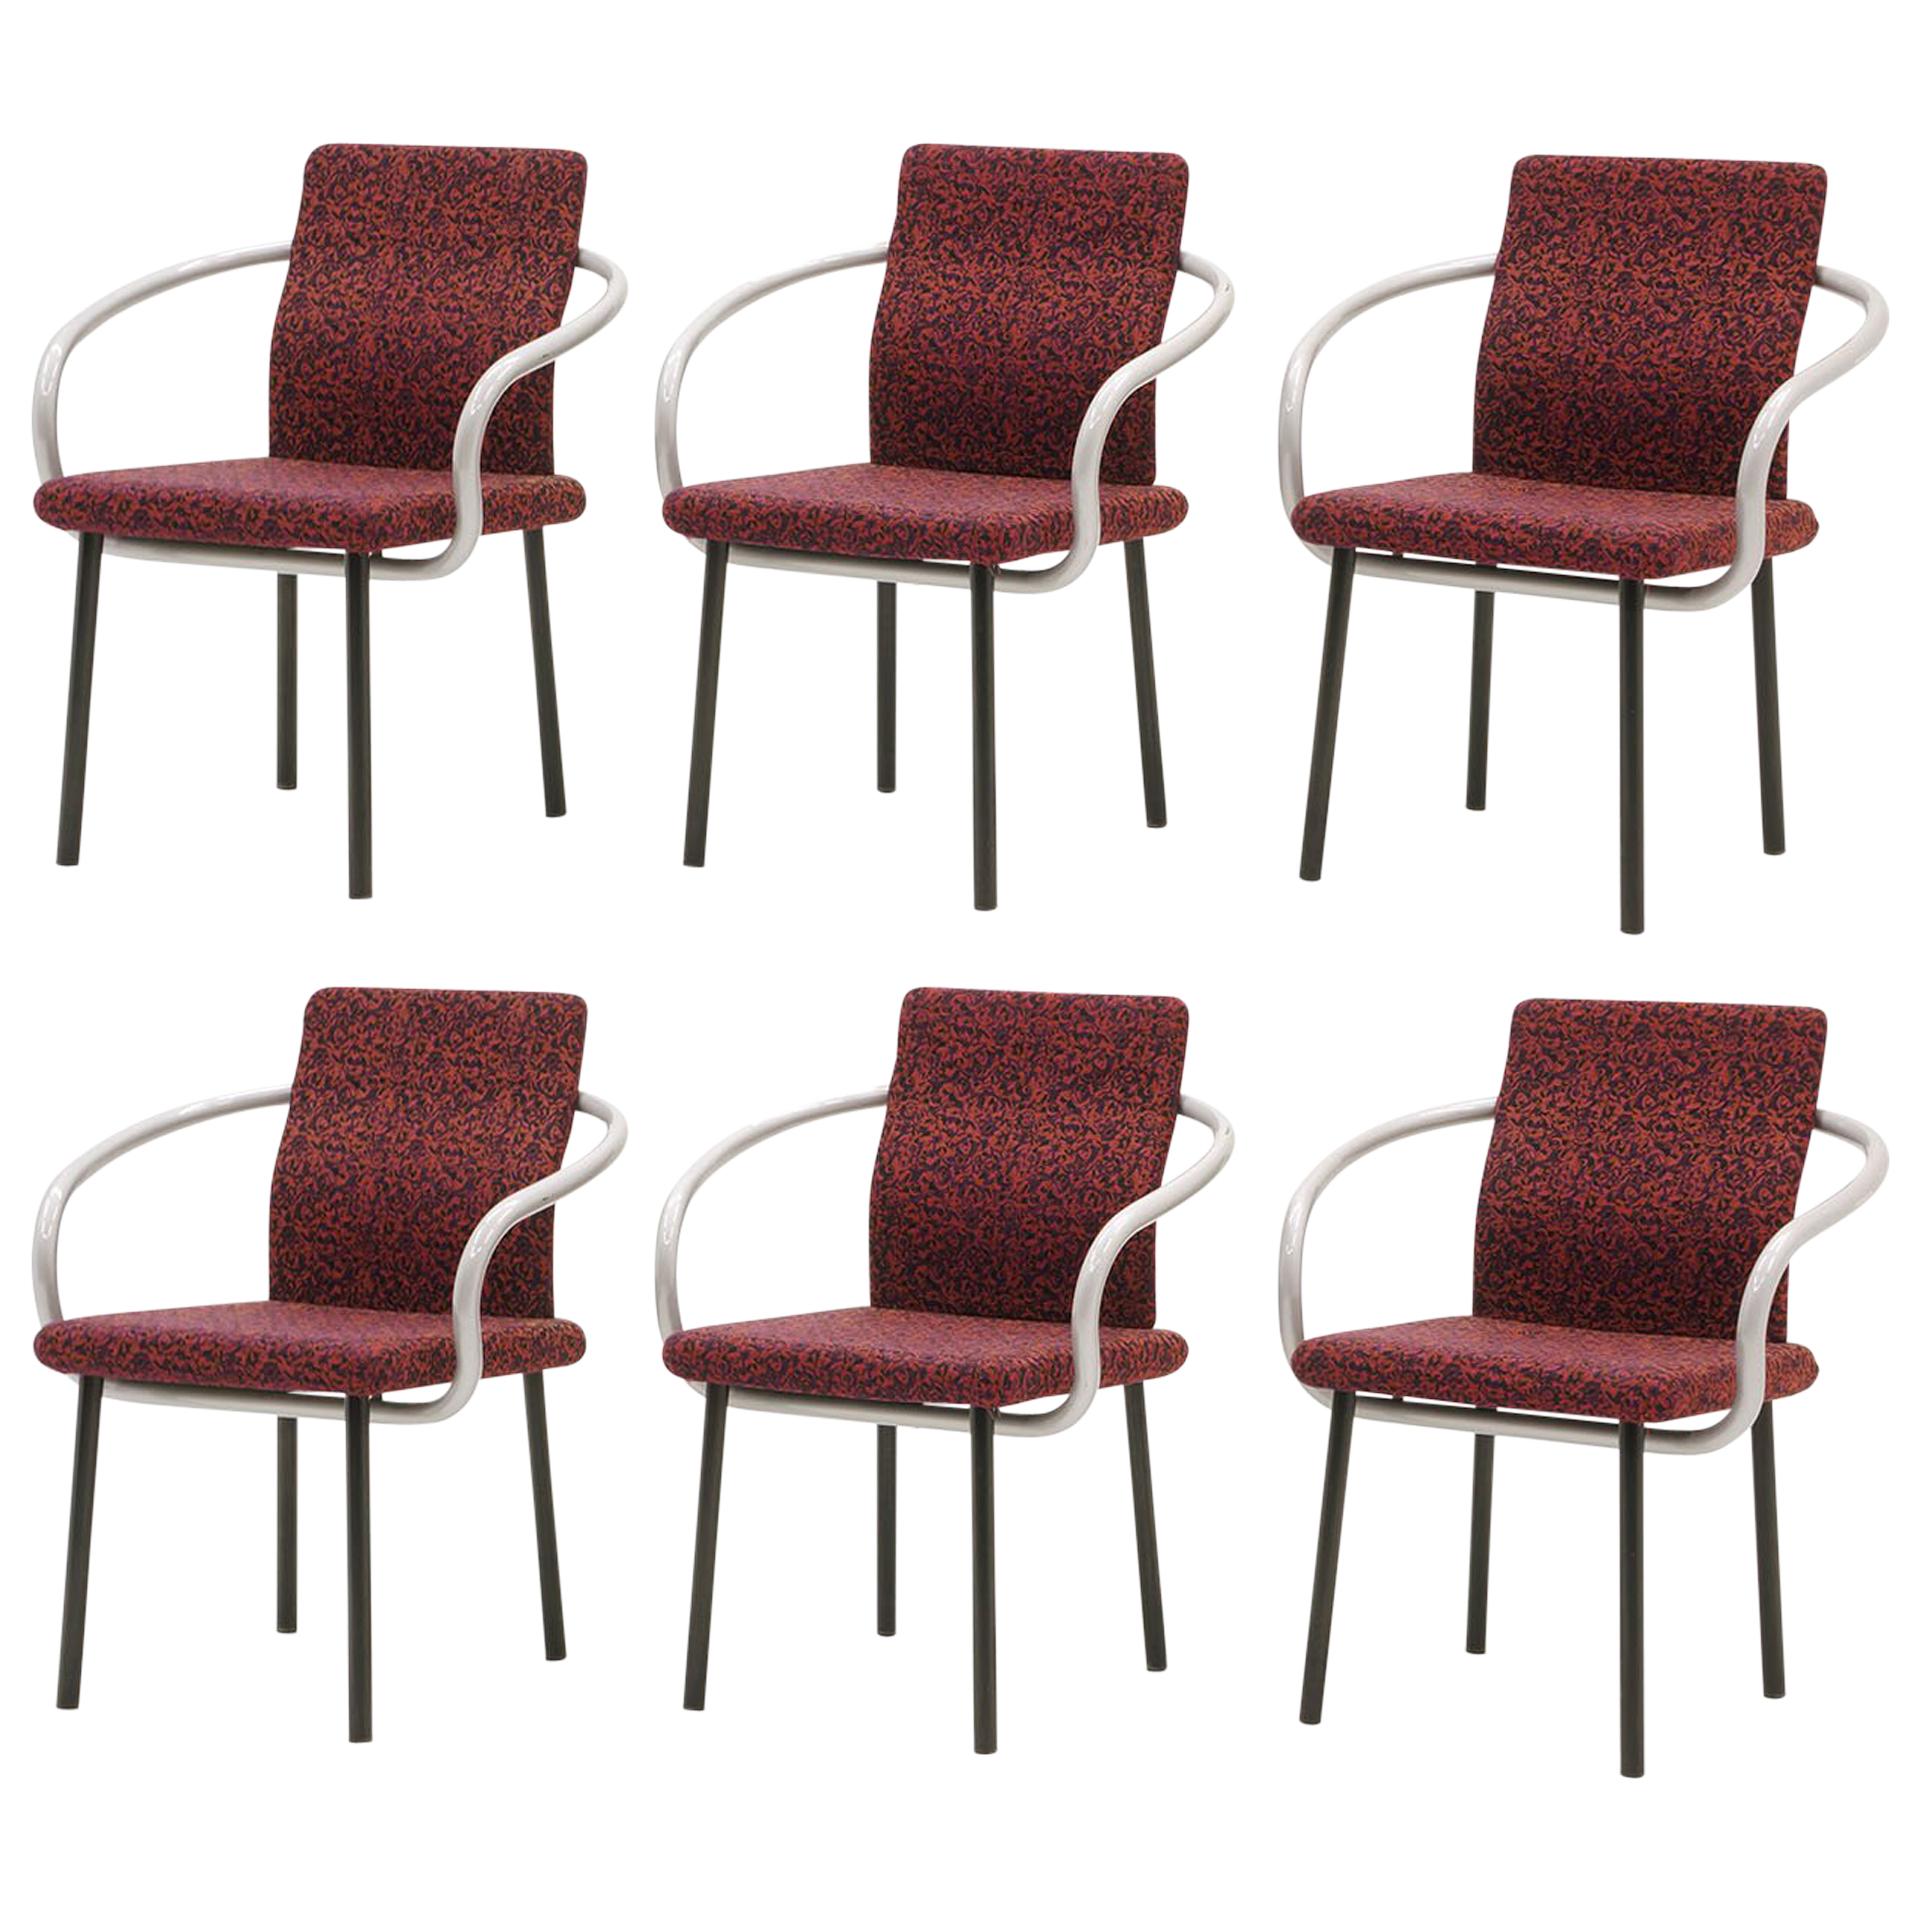 Set of Six Mandarin Dining Chairs by Ettore Sottsass for Knoll